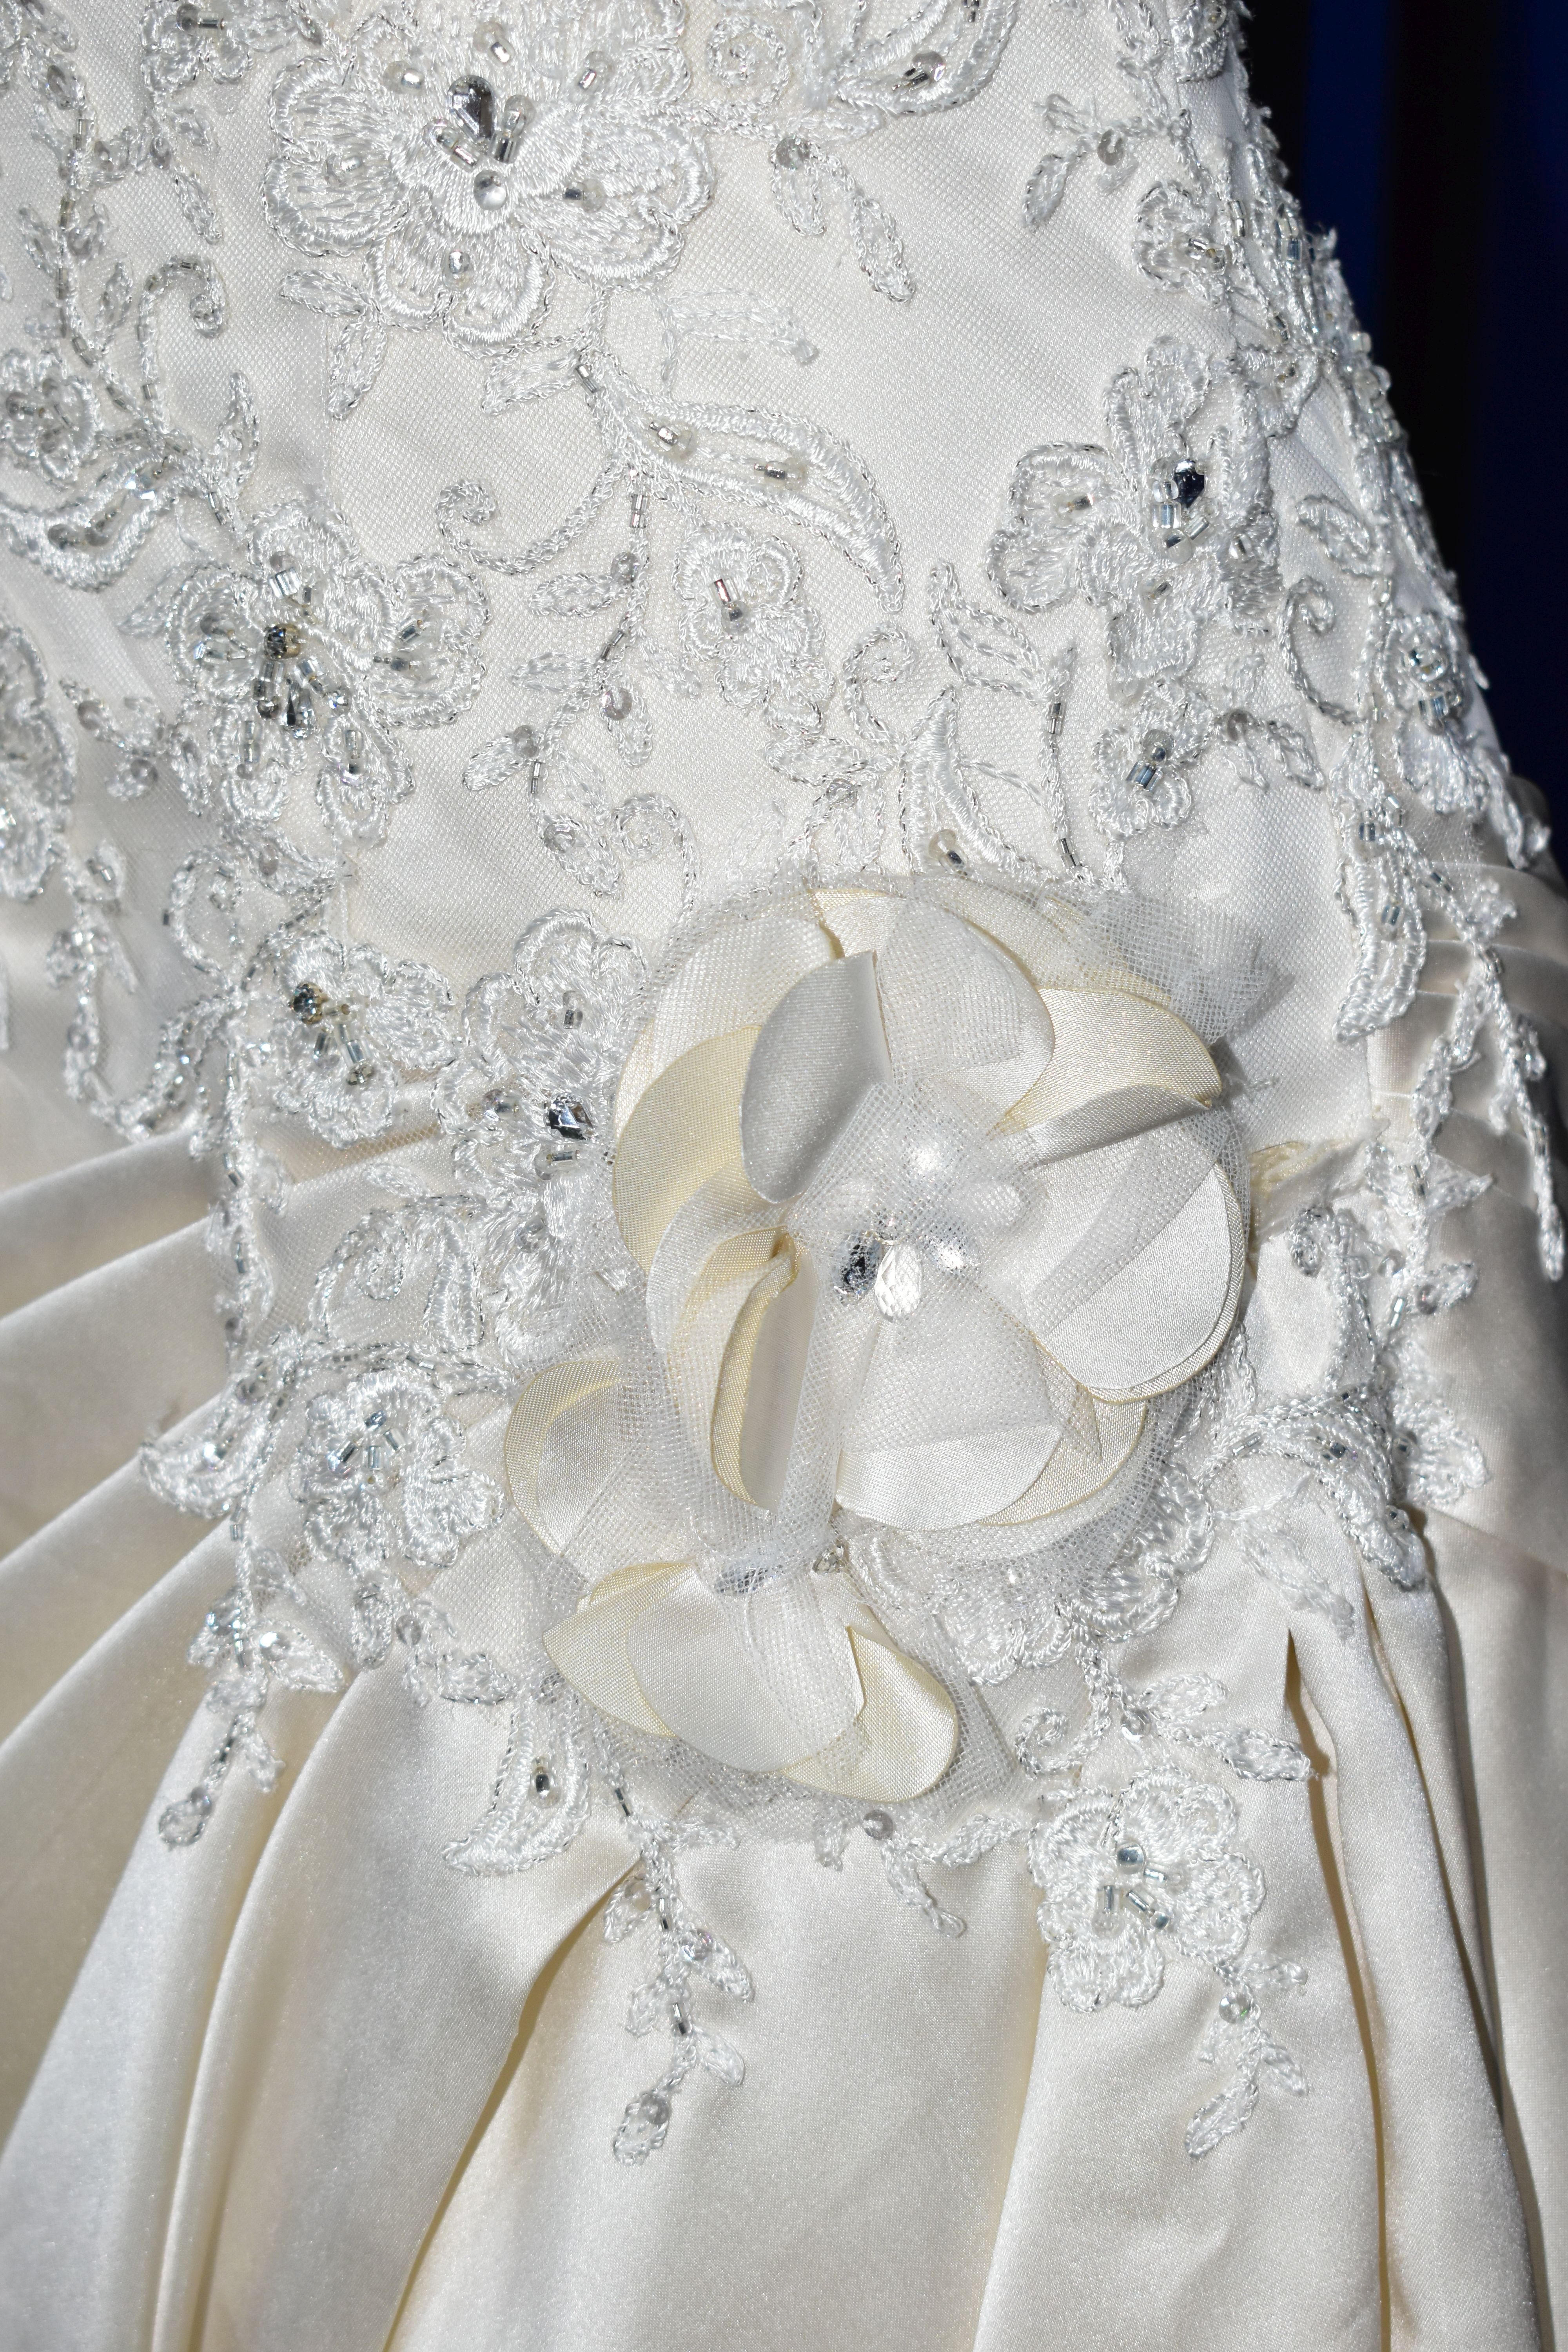 WEDDING GOWN, champagne, size 10/12, satin with beaded appliques, gathered satin skirt (1) - Image 5 of 13